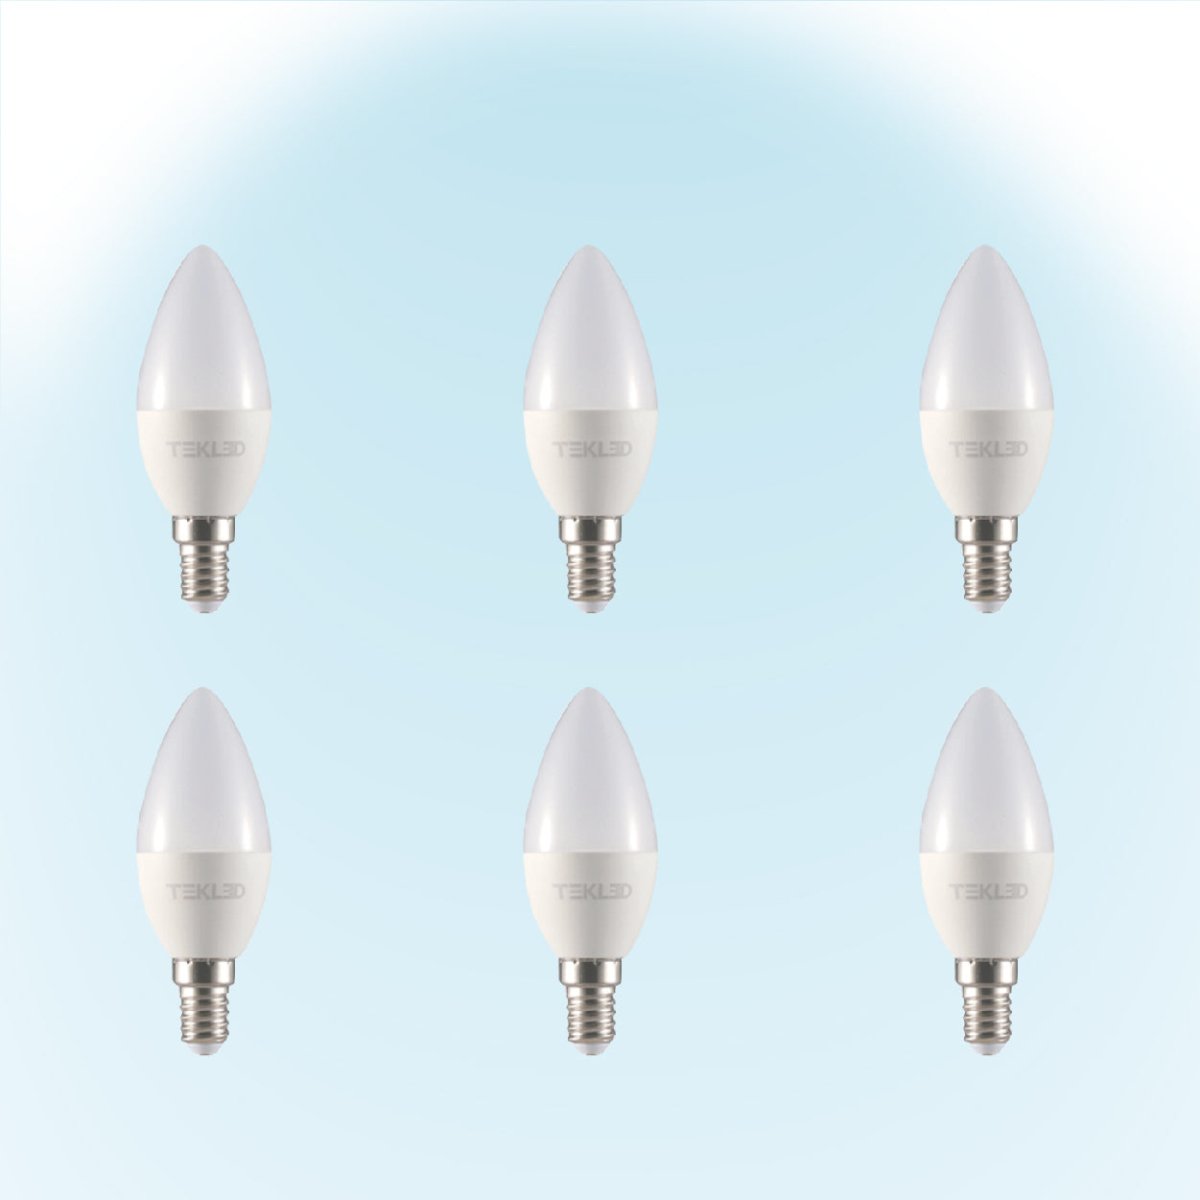 Vela LED Candle Bulb C37 Dimmable E14 Small Edison Screw 5W Pack of 6 6500k cool daylight